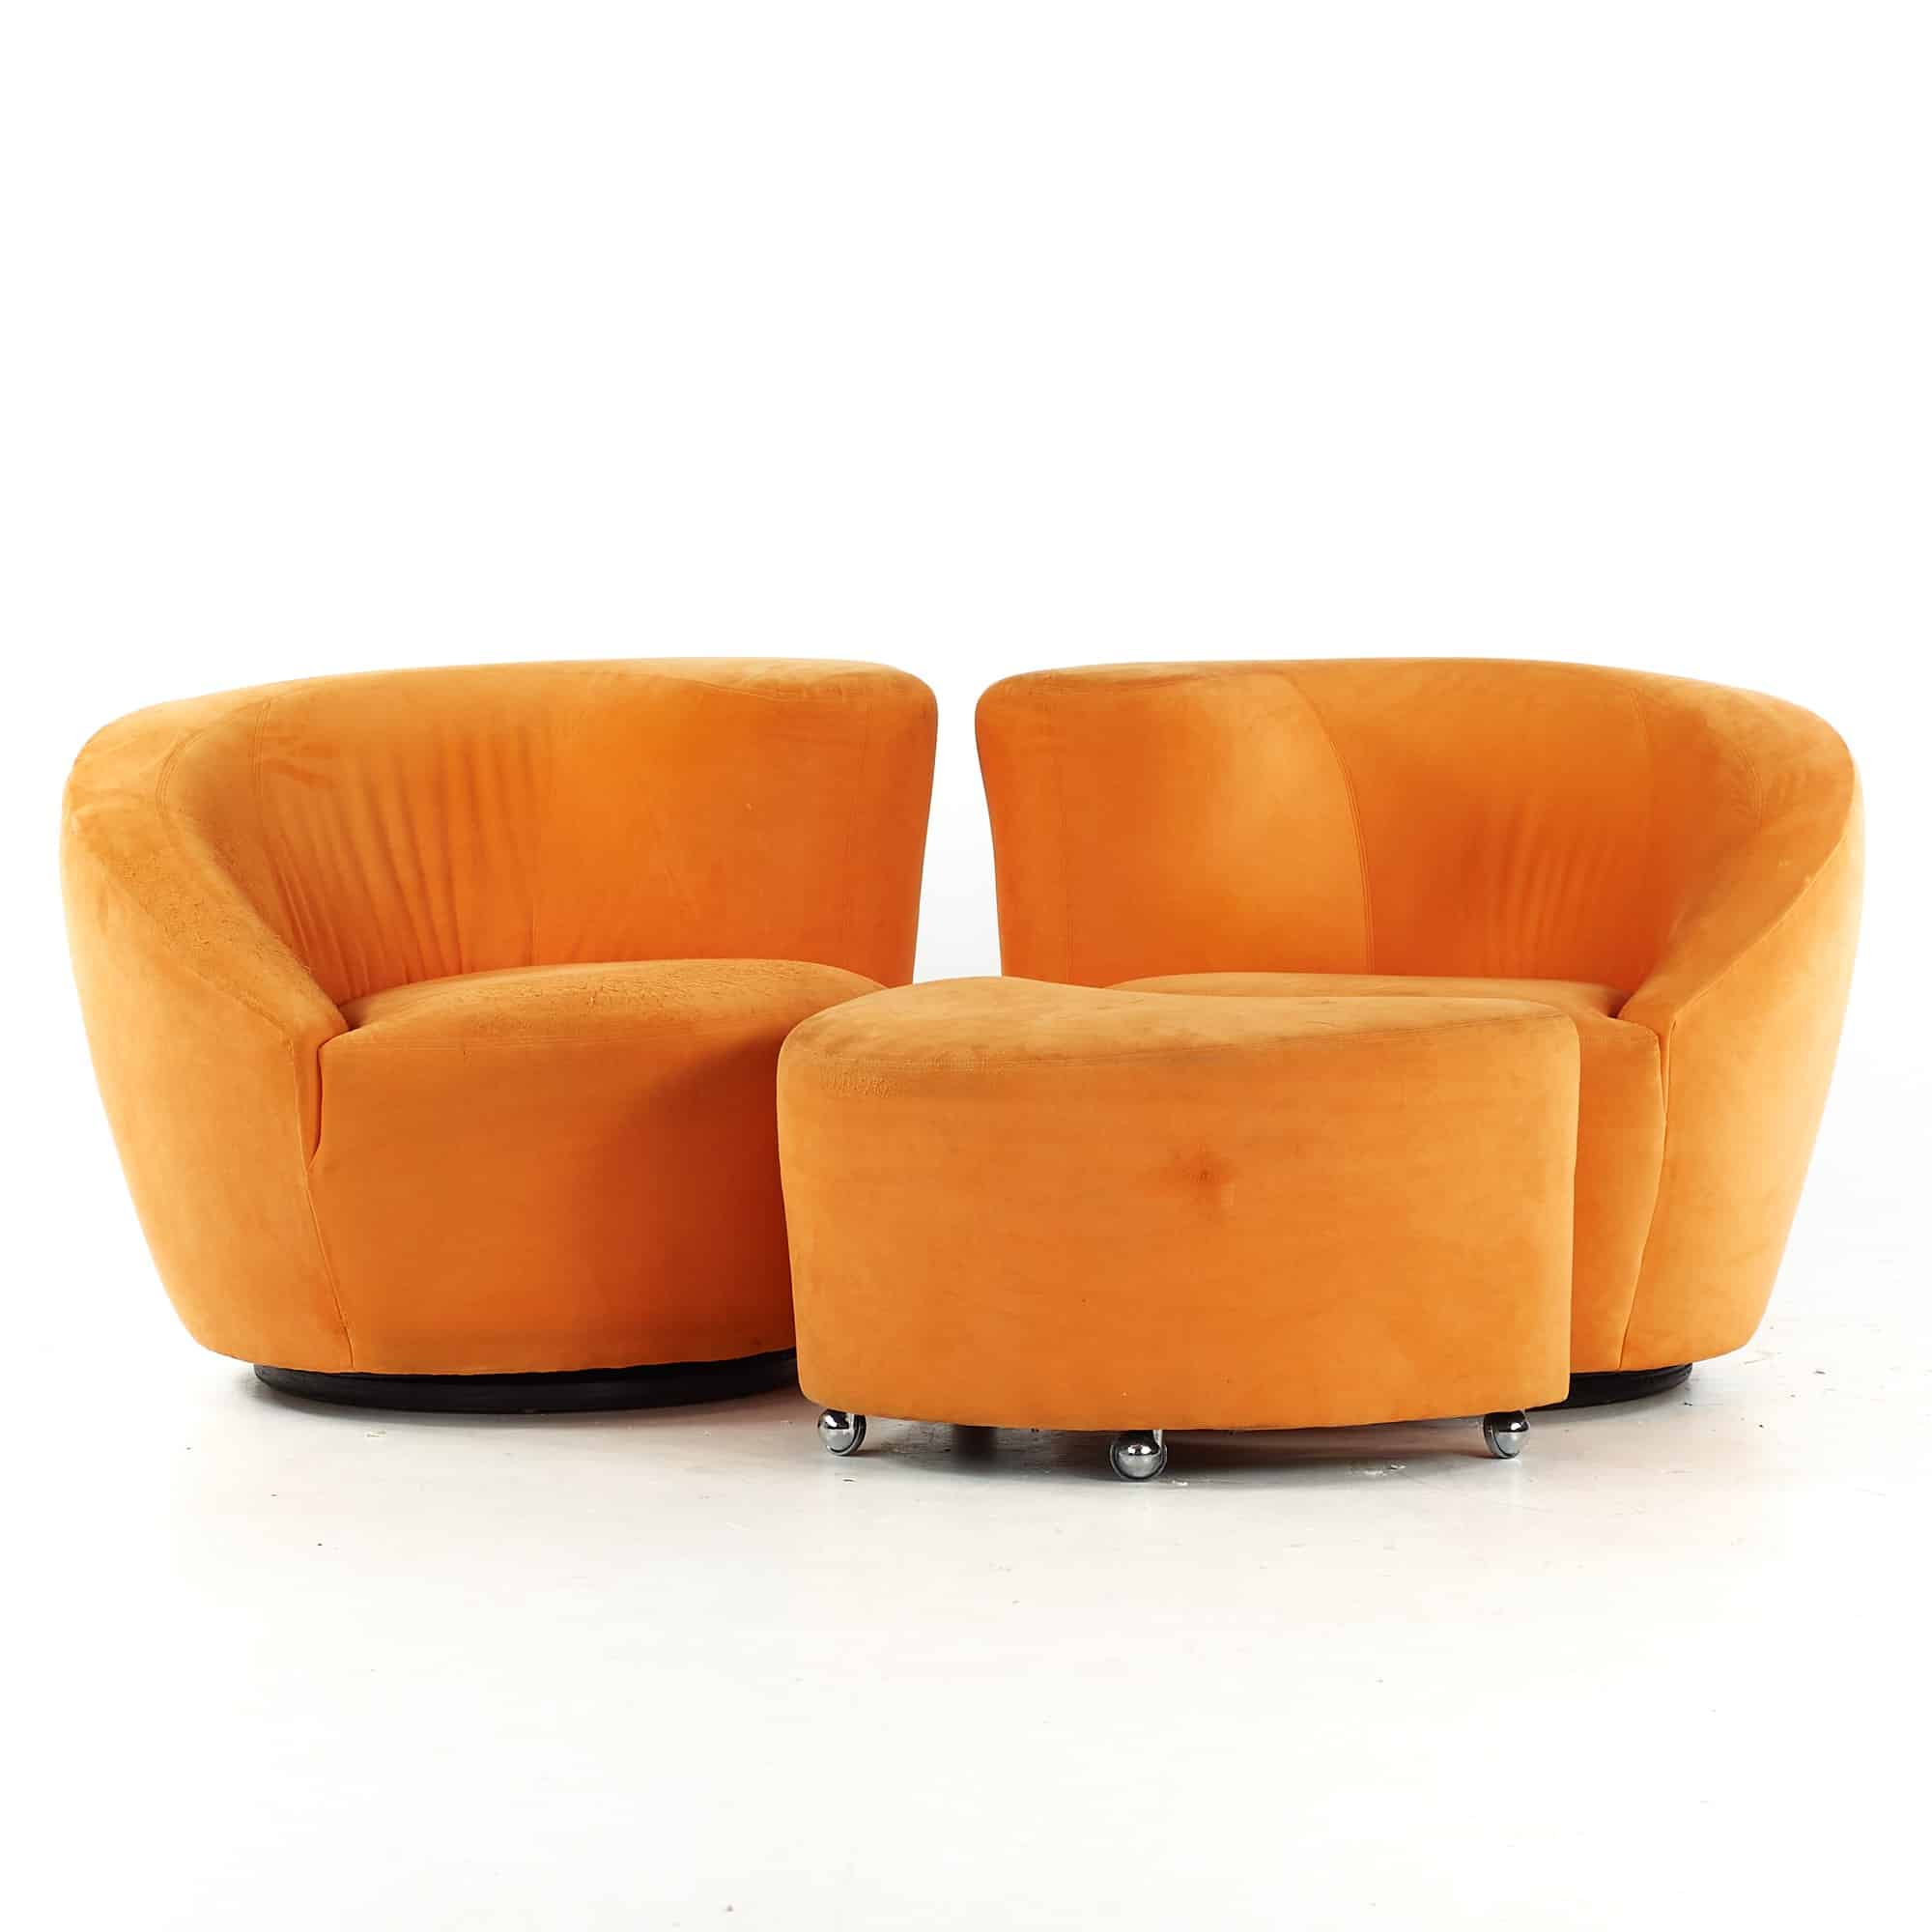 Vladimir Kagan for Directional Mid Century Lounge Chairs with Ottoman - Pair